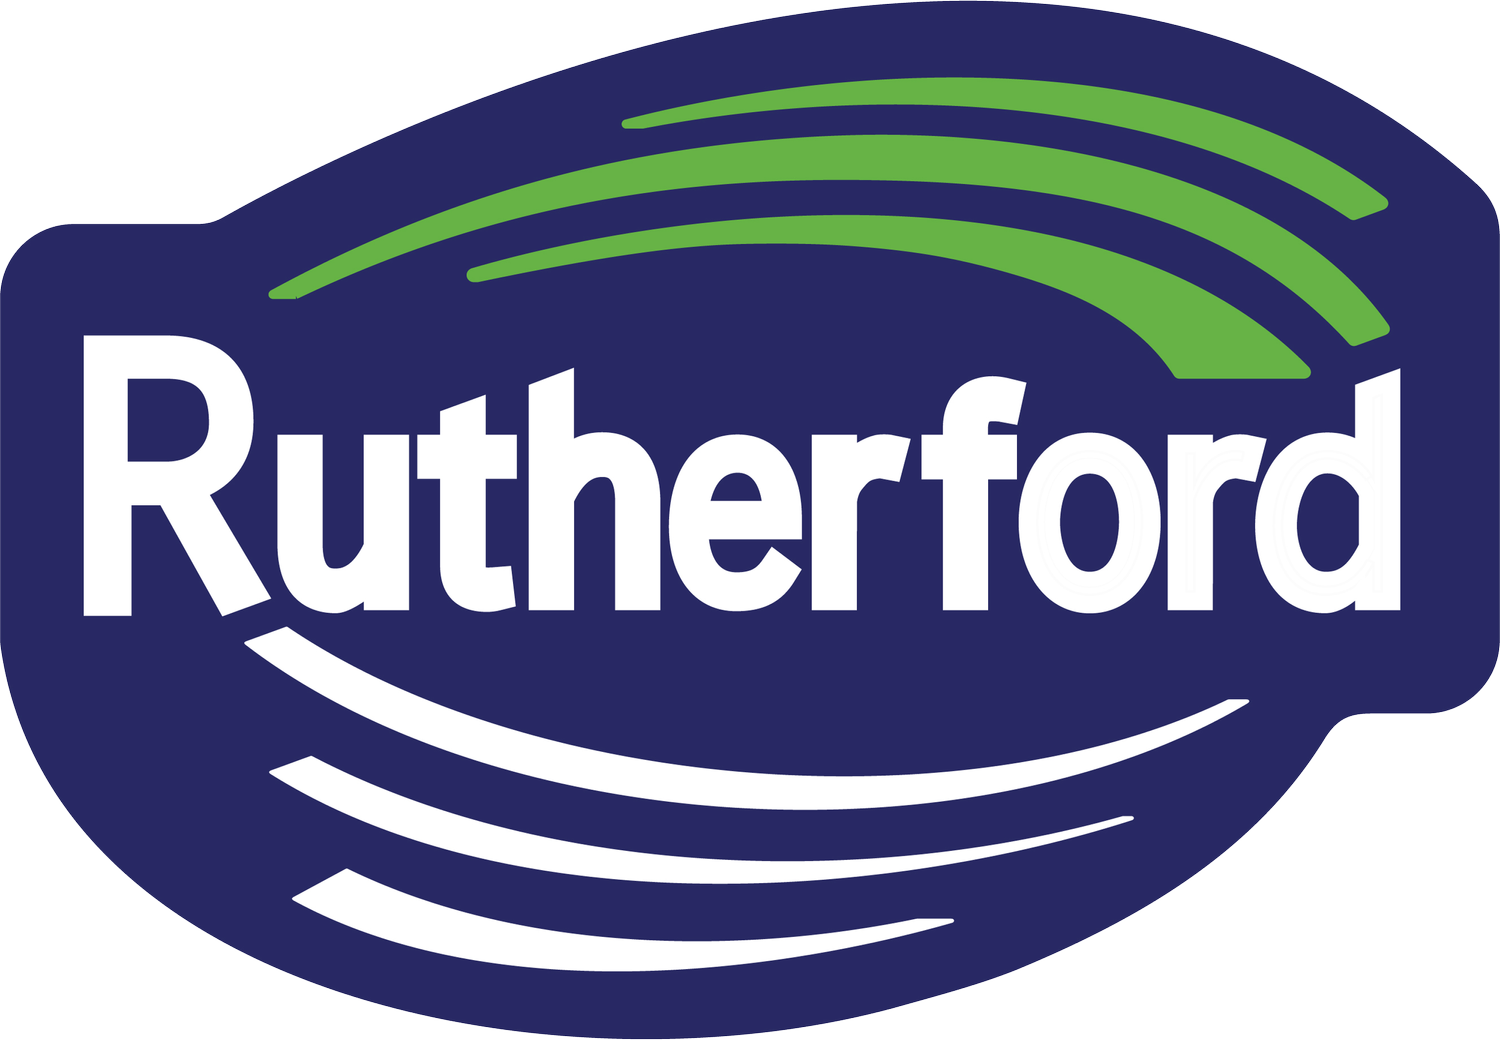 Rutherford Contracting